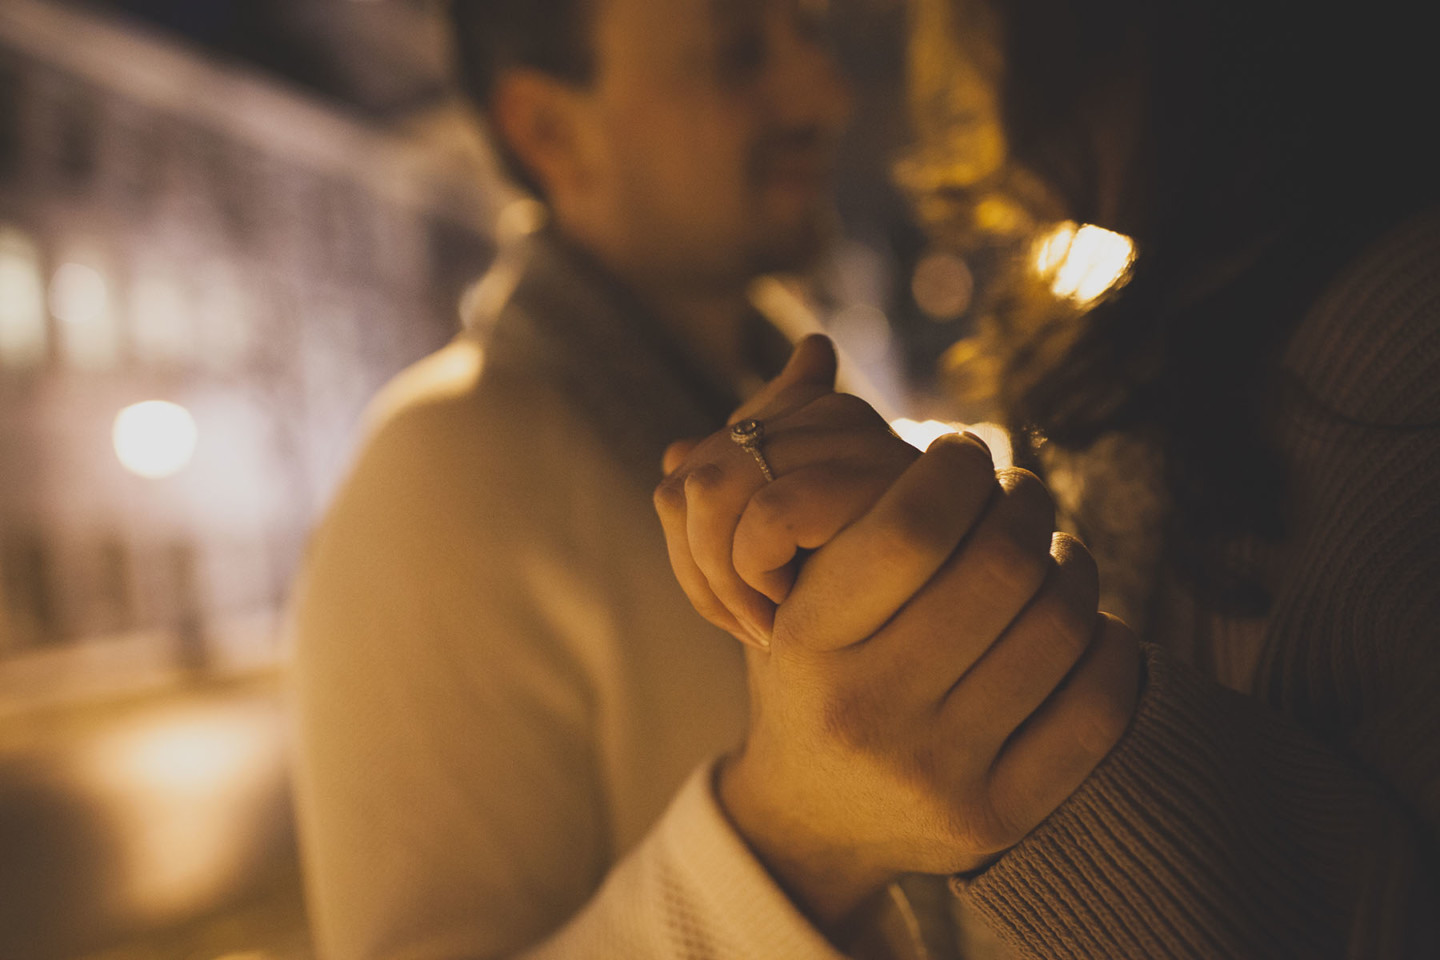 close up photo of a woman's engagement ring while a man and a woman dance under a streetlight